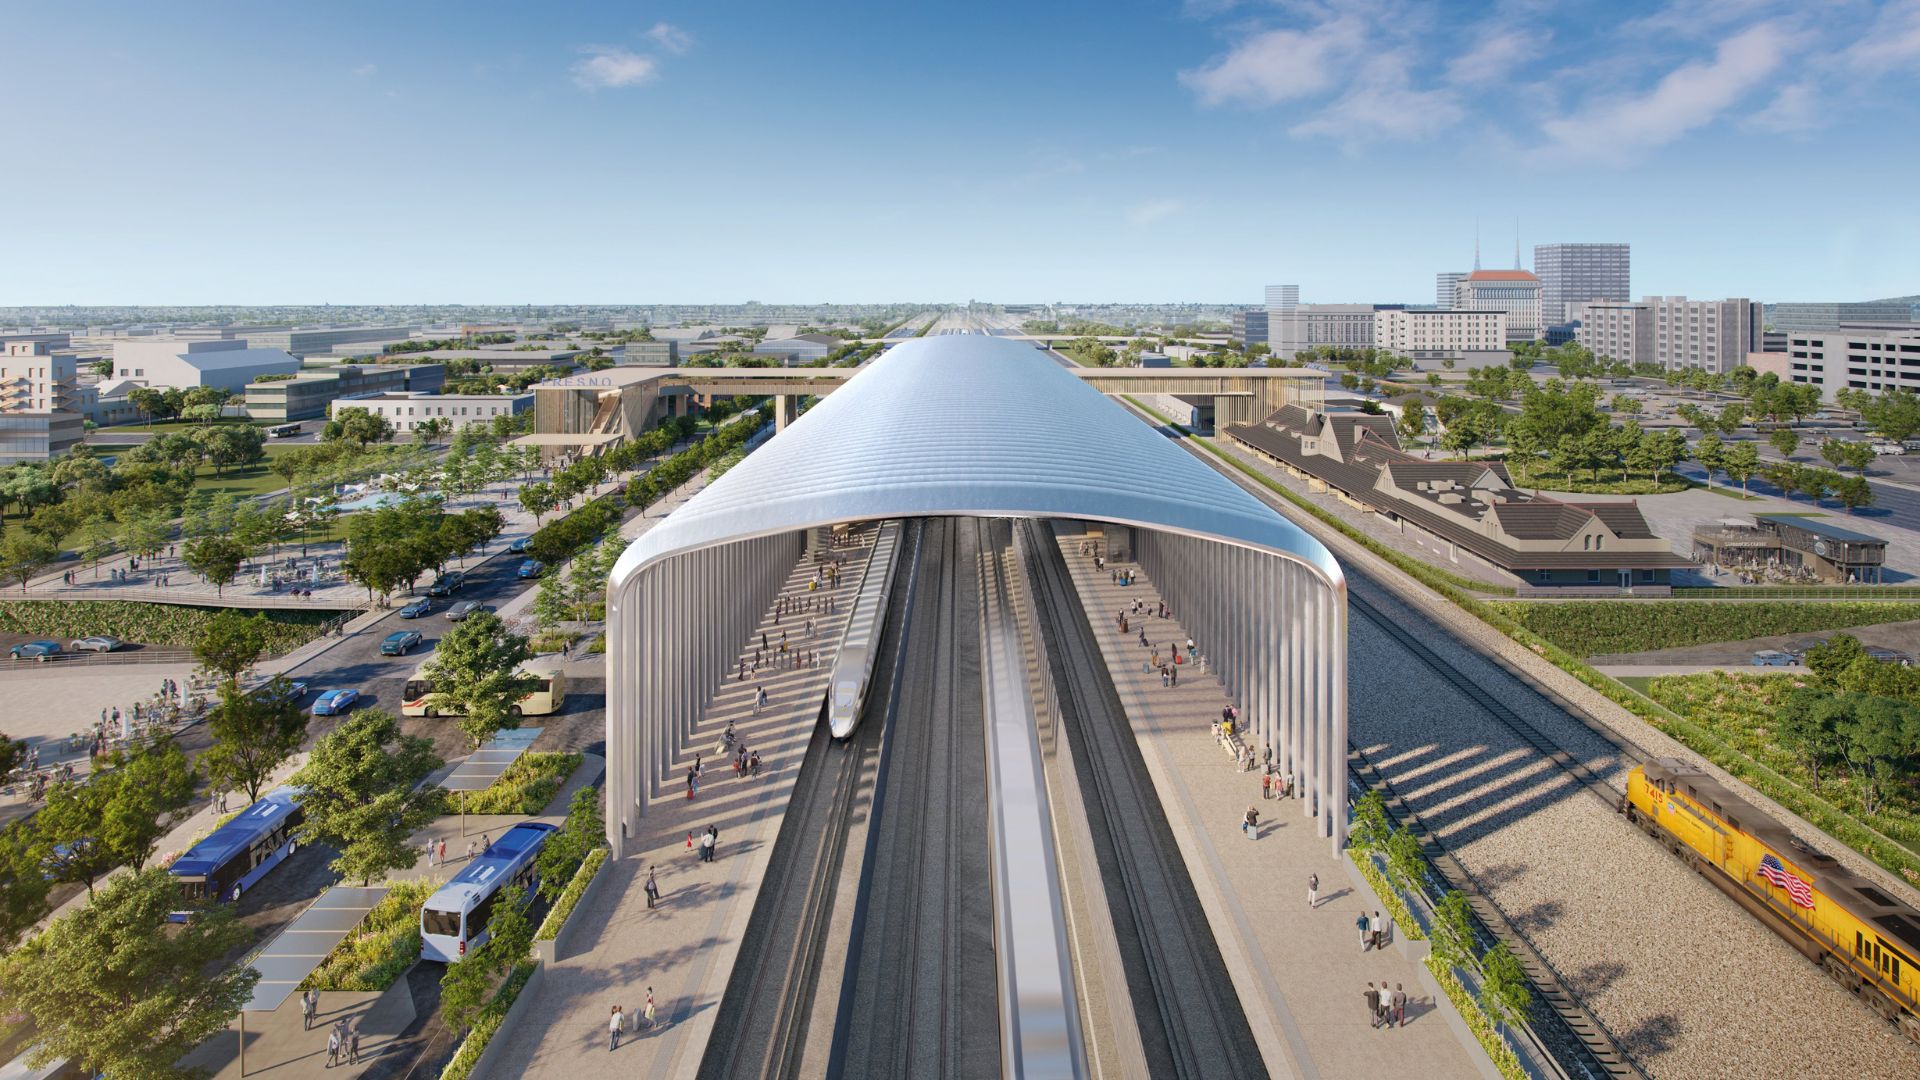 <p>As the high-speed rail project hangs in the balance, the conversation continues about the viability and justification of continuing.     </p> <p>The public and pundits alike are watching closely, waiting to see if this bridge will ever lead to its intended destination. </p>